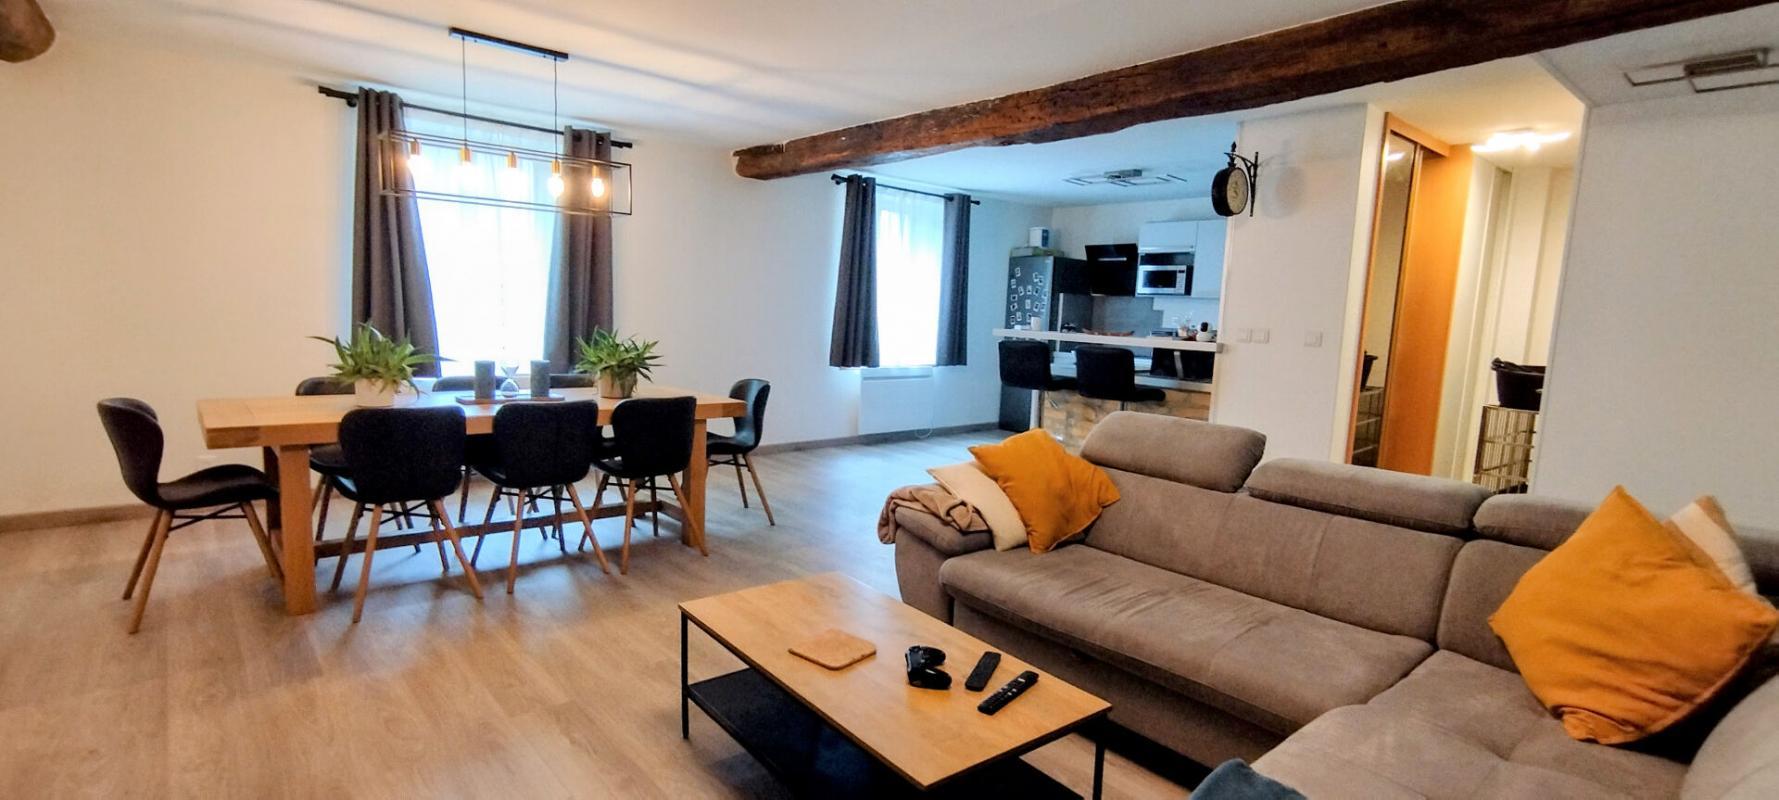 Appartement 3 pièces 79 m² Bailly-Romainvilliers